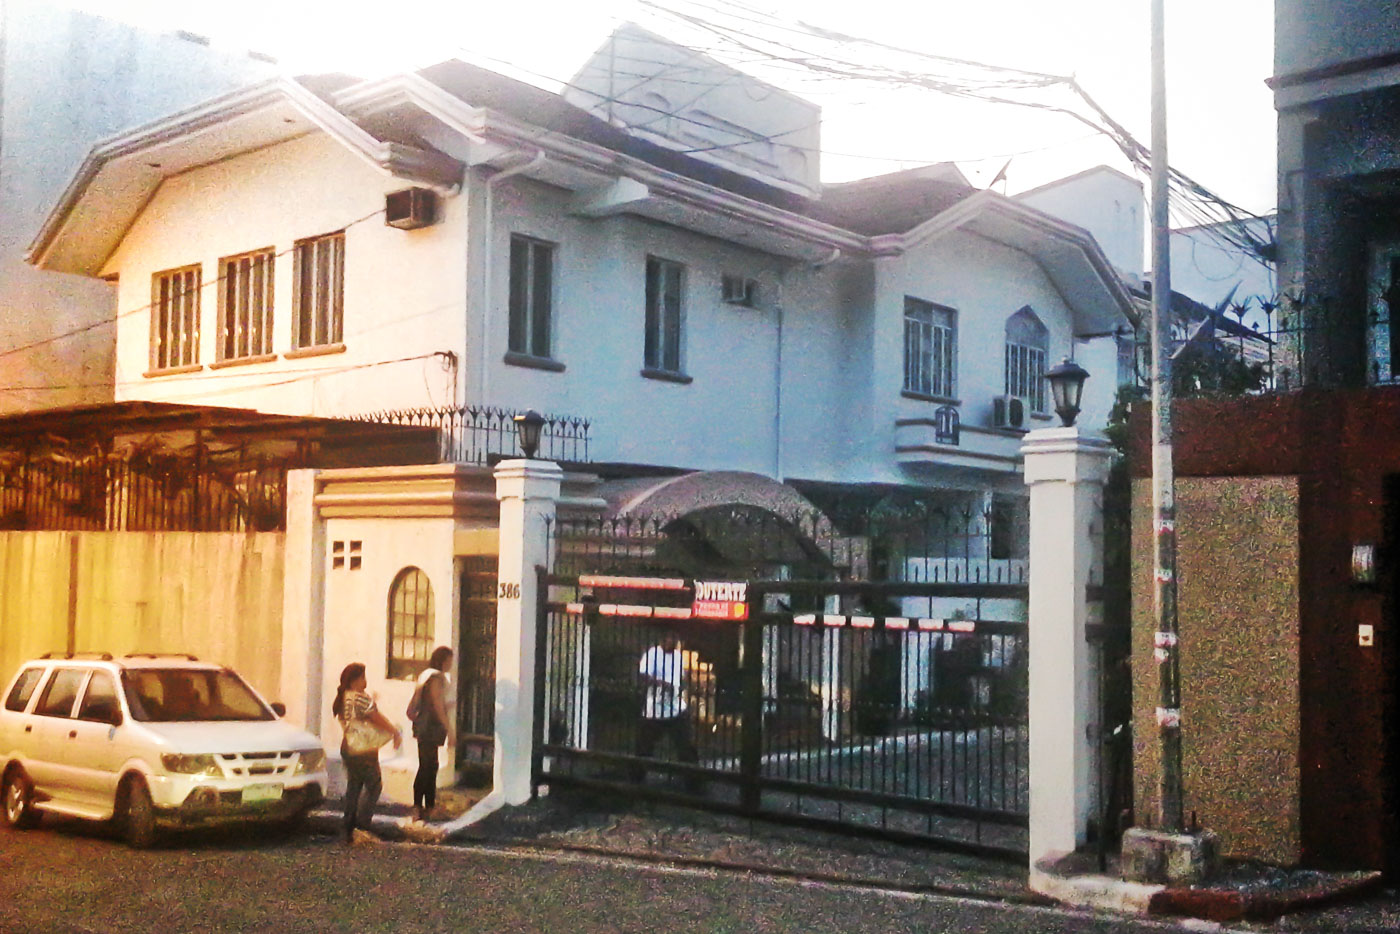 PROPERTY. The townhouse, with address 386 P. Guevarra St., San Juan, is the address in the BPI account of presidential candidate and Davao City Mayor Rodrigo Duterte. Rappler photo 